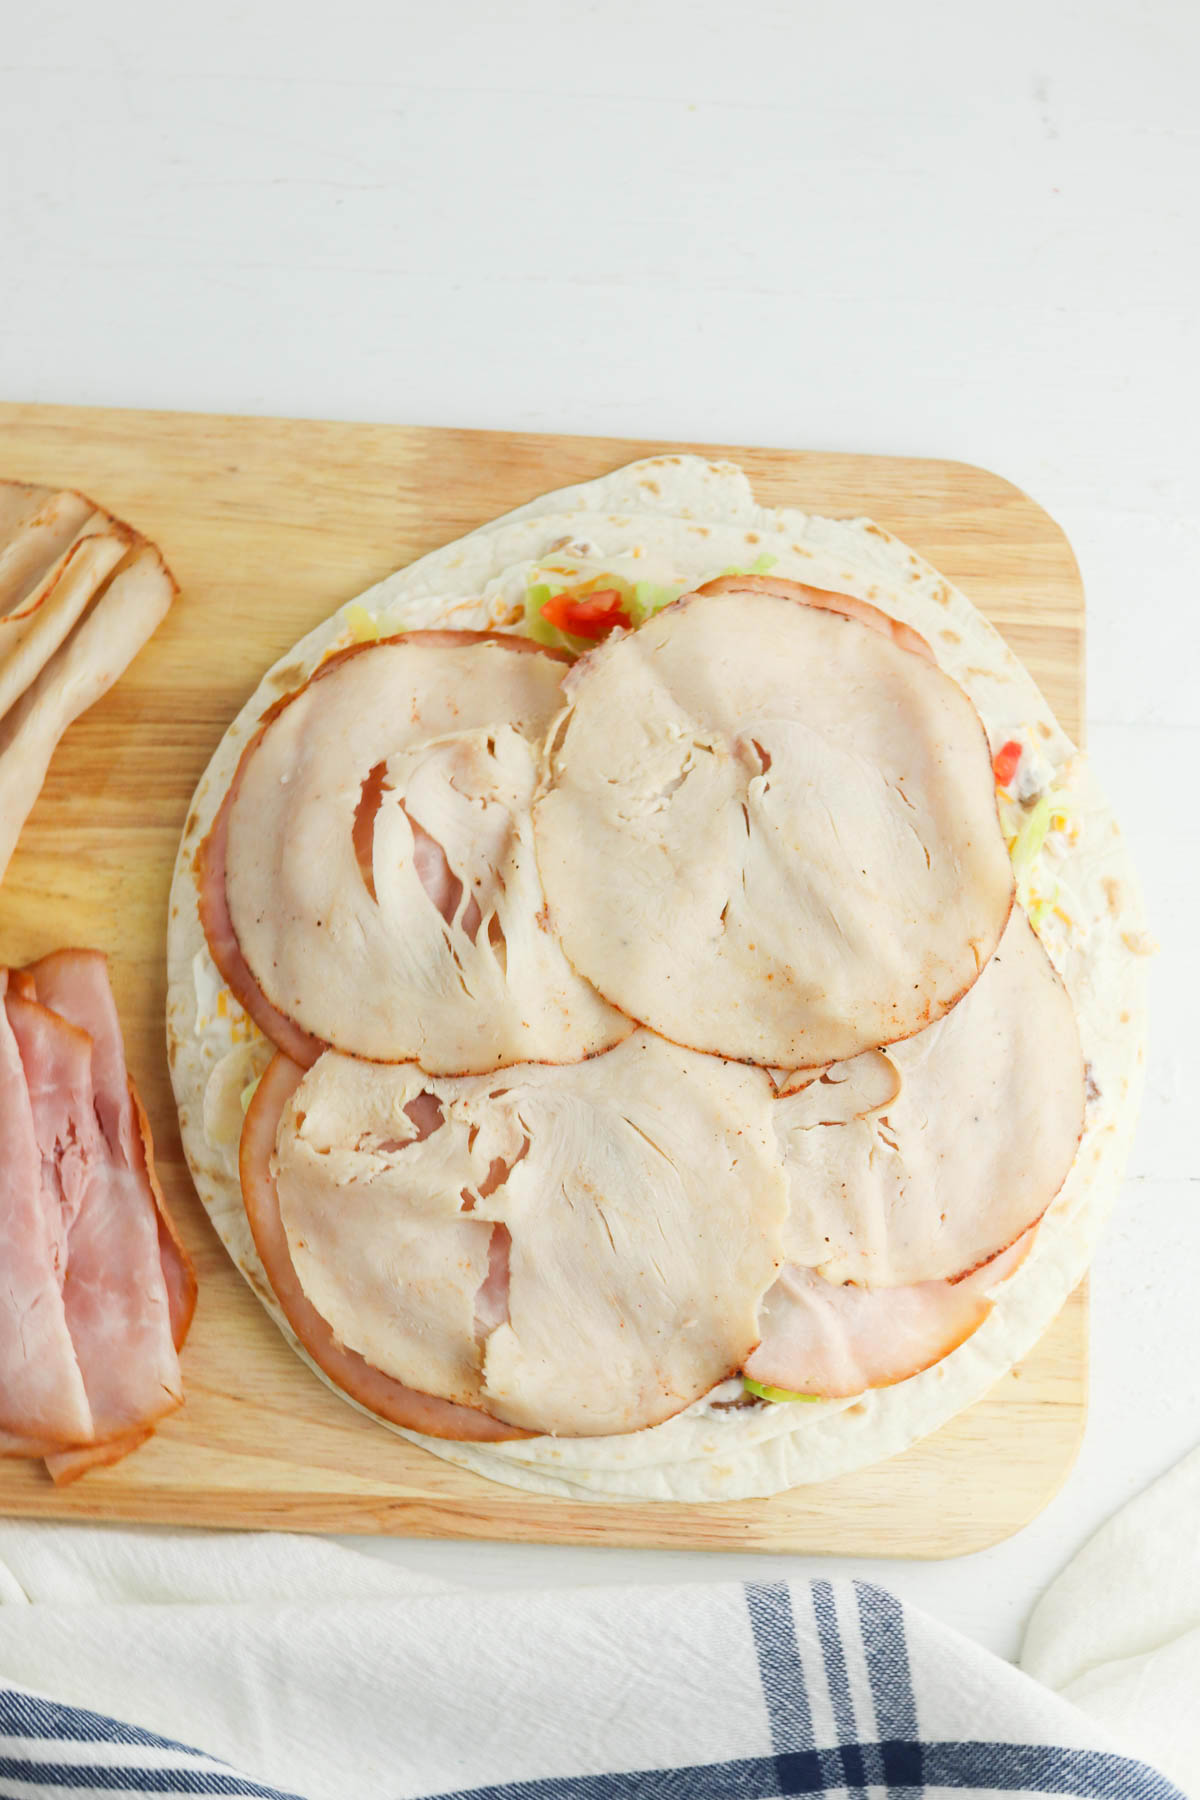 Turkey slices layered on an open tortilla wrap on a wooden cutting board.